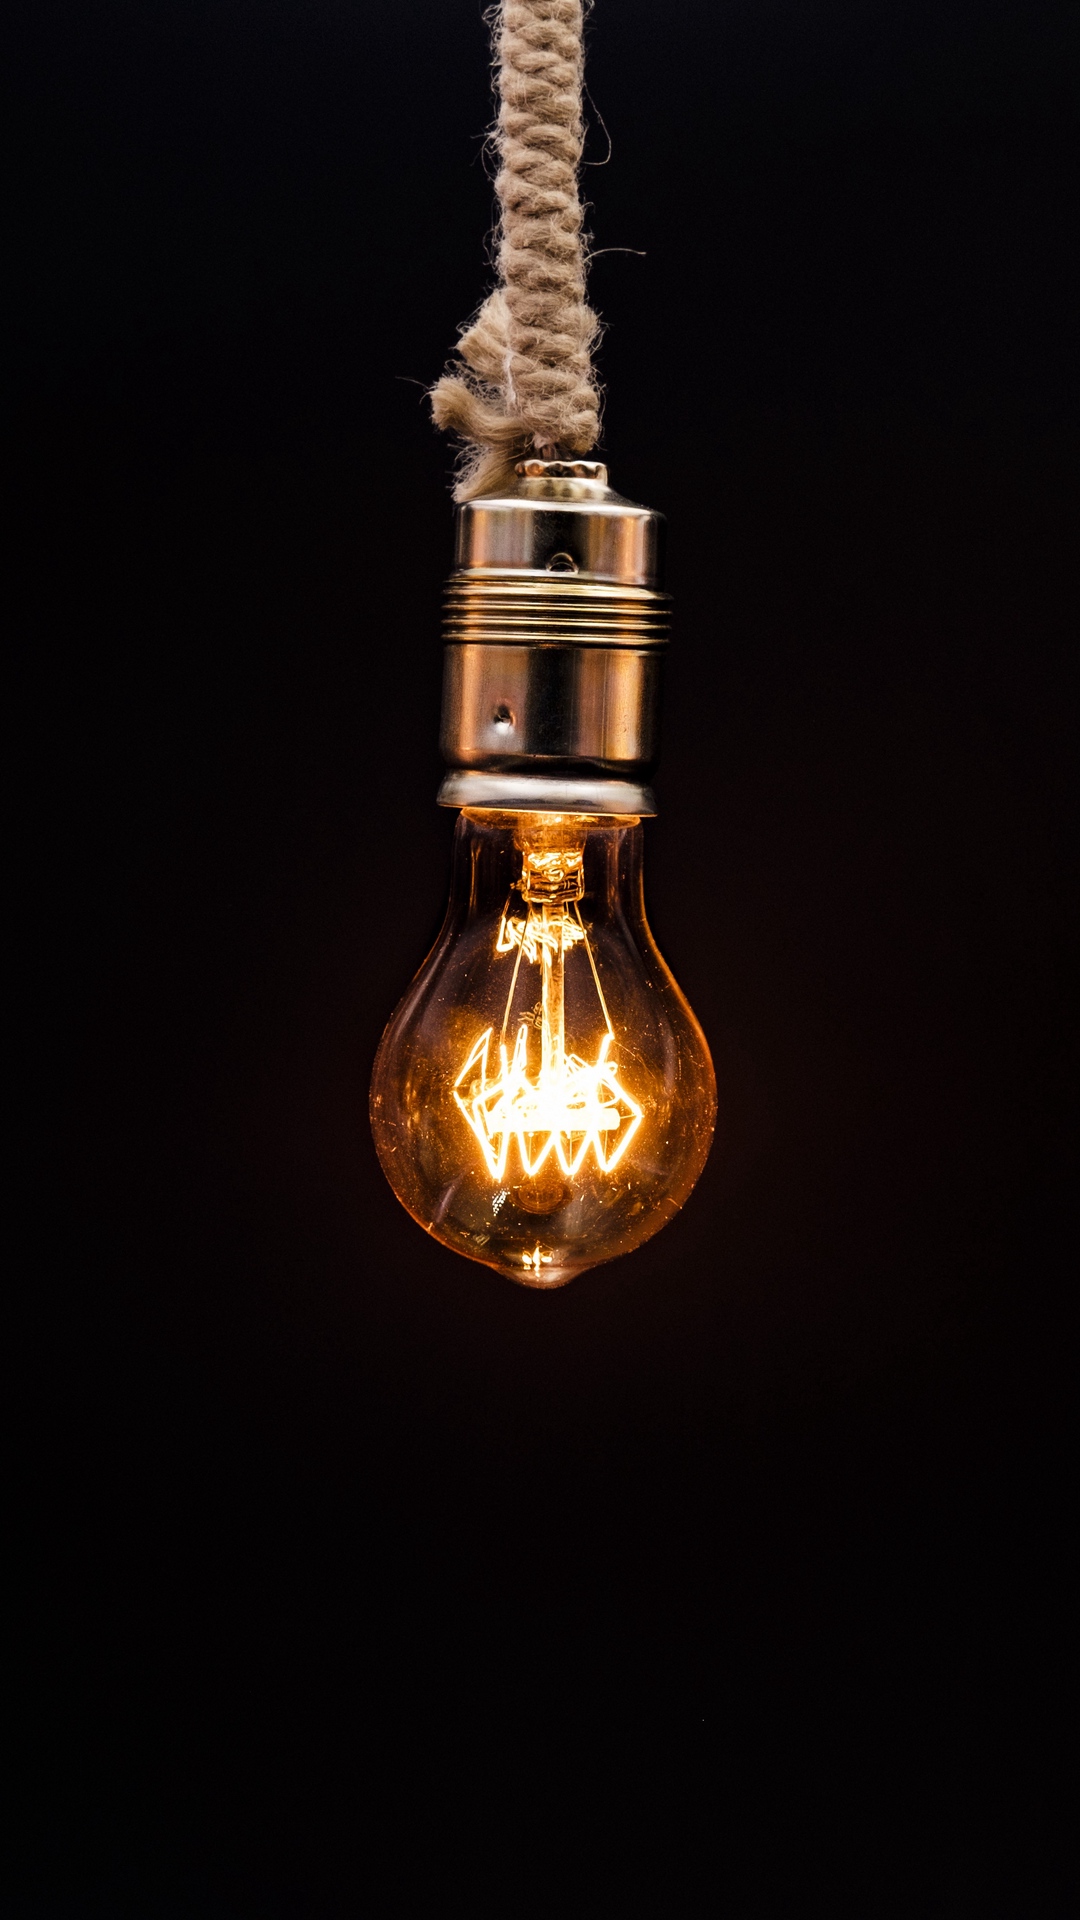 Wallpaper Bulb, Lighting, Rope, Electricity, Edisons - Bulb Wallpaper Hd For Mobile - HD Wallpaper 